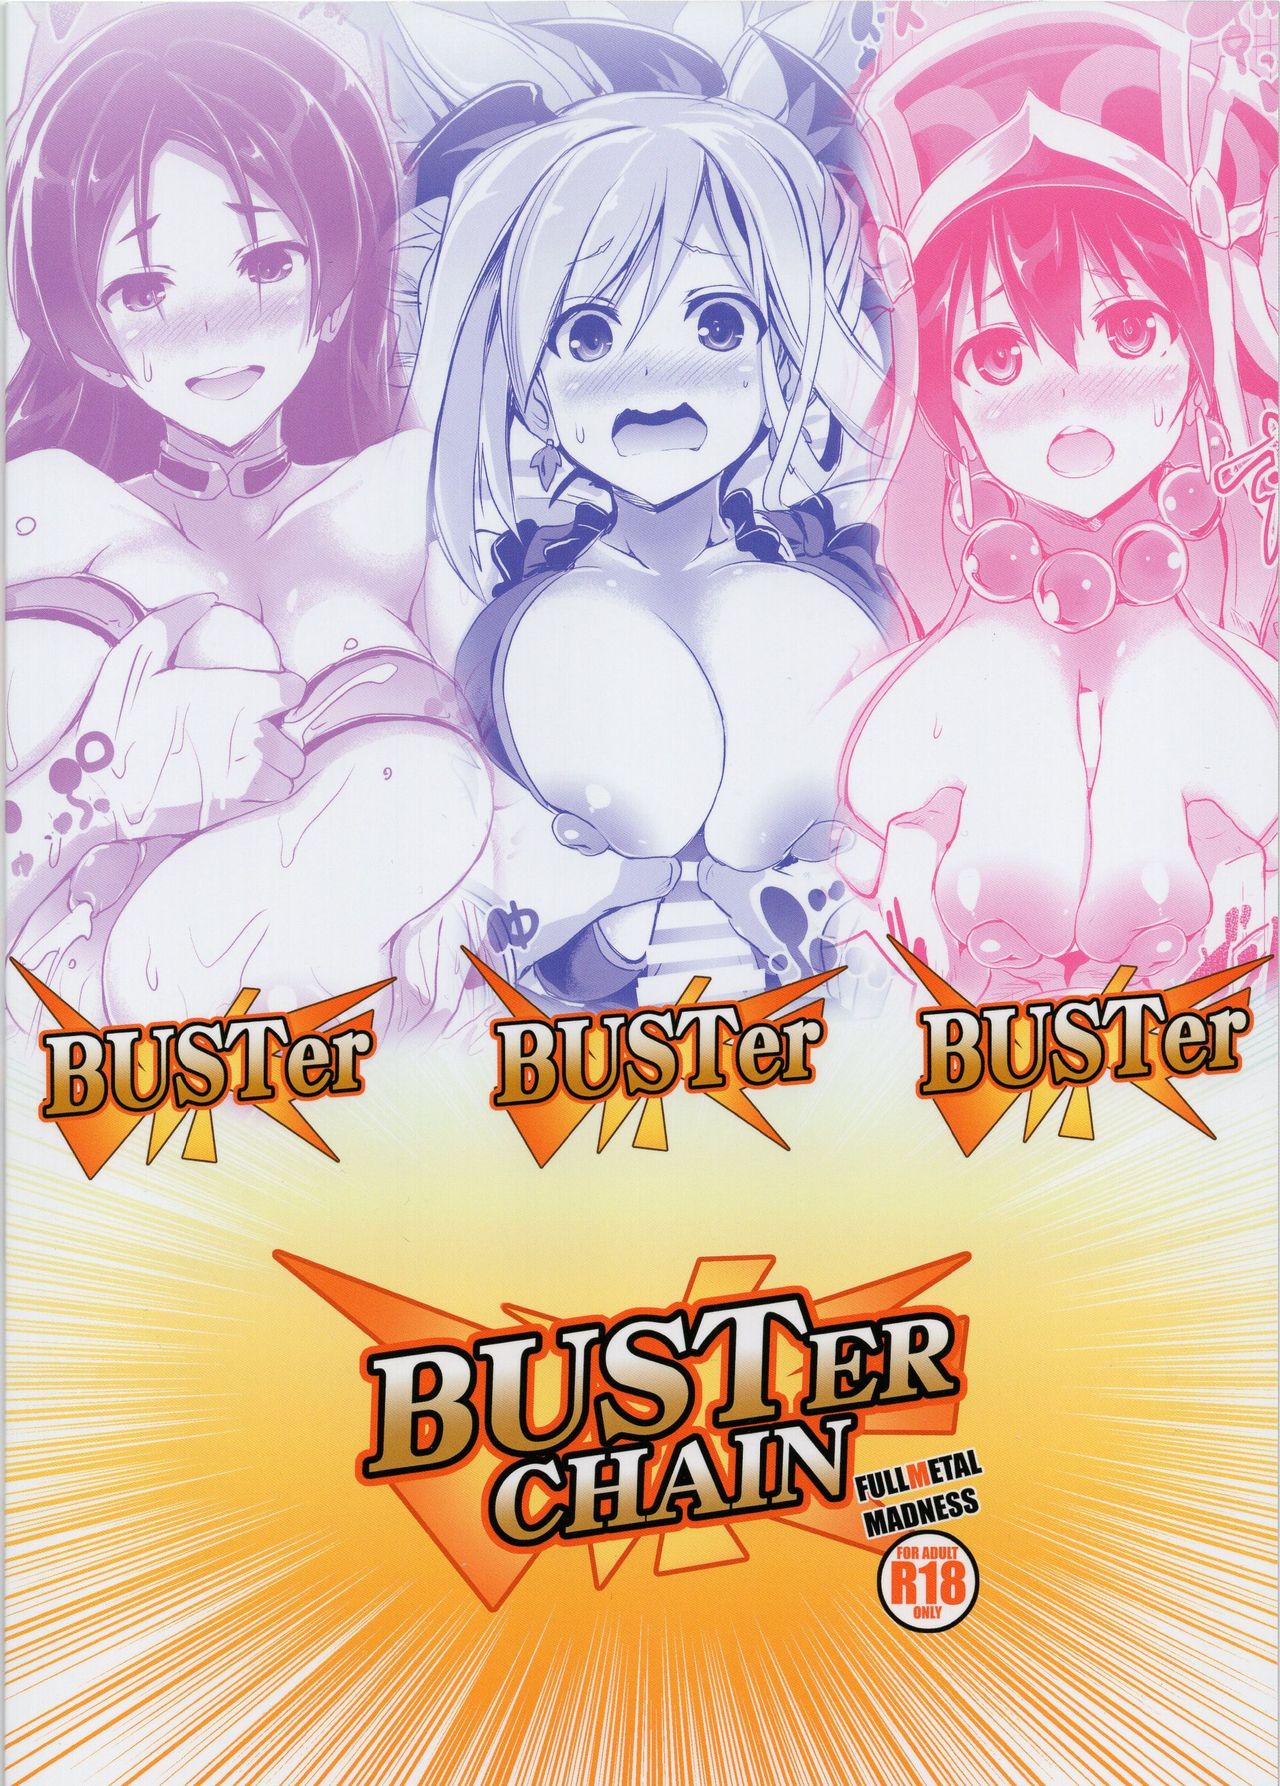 (C94) [FULLMETAL MADNESS (旭)] Buster chain (Fate/Grand Order)